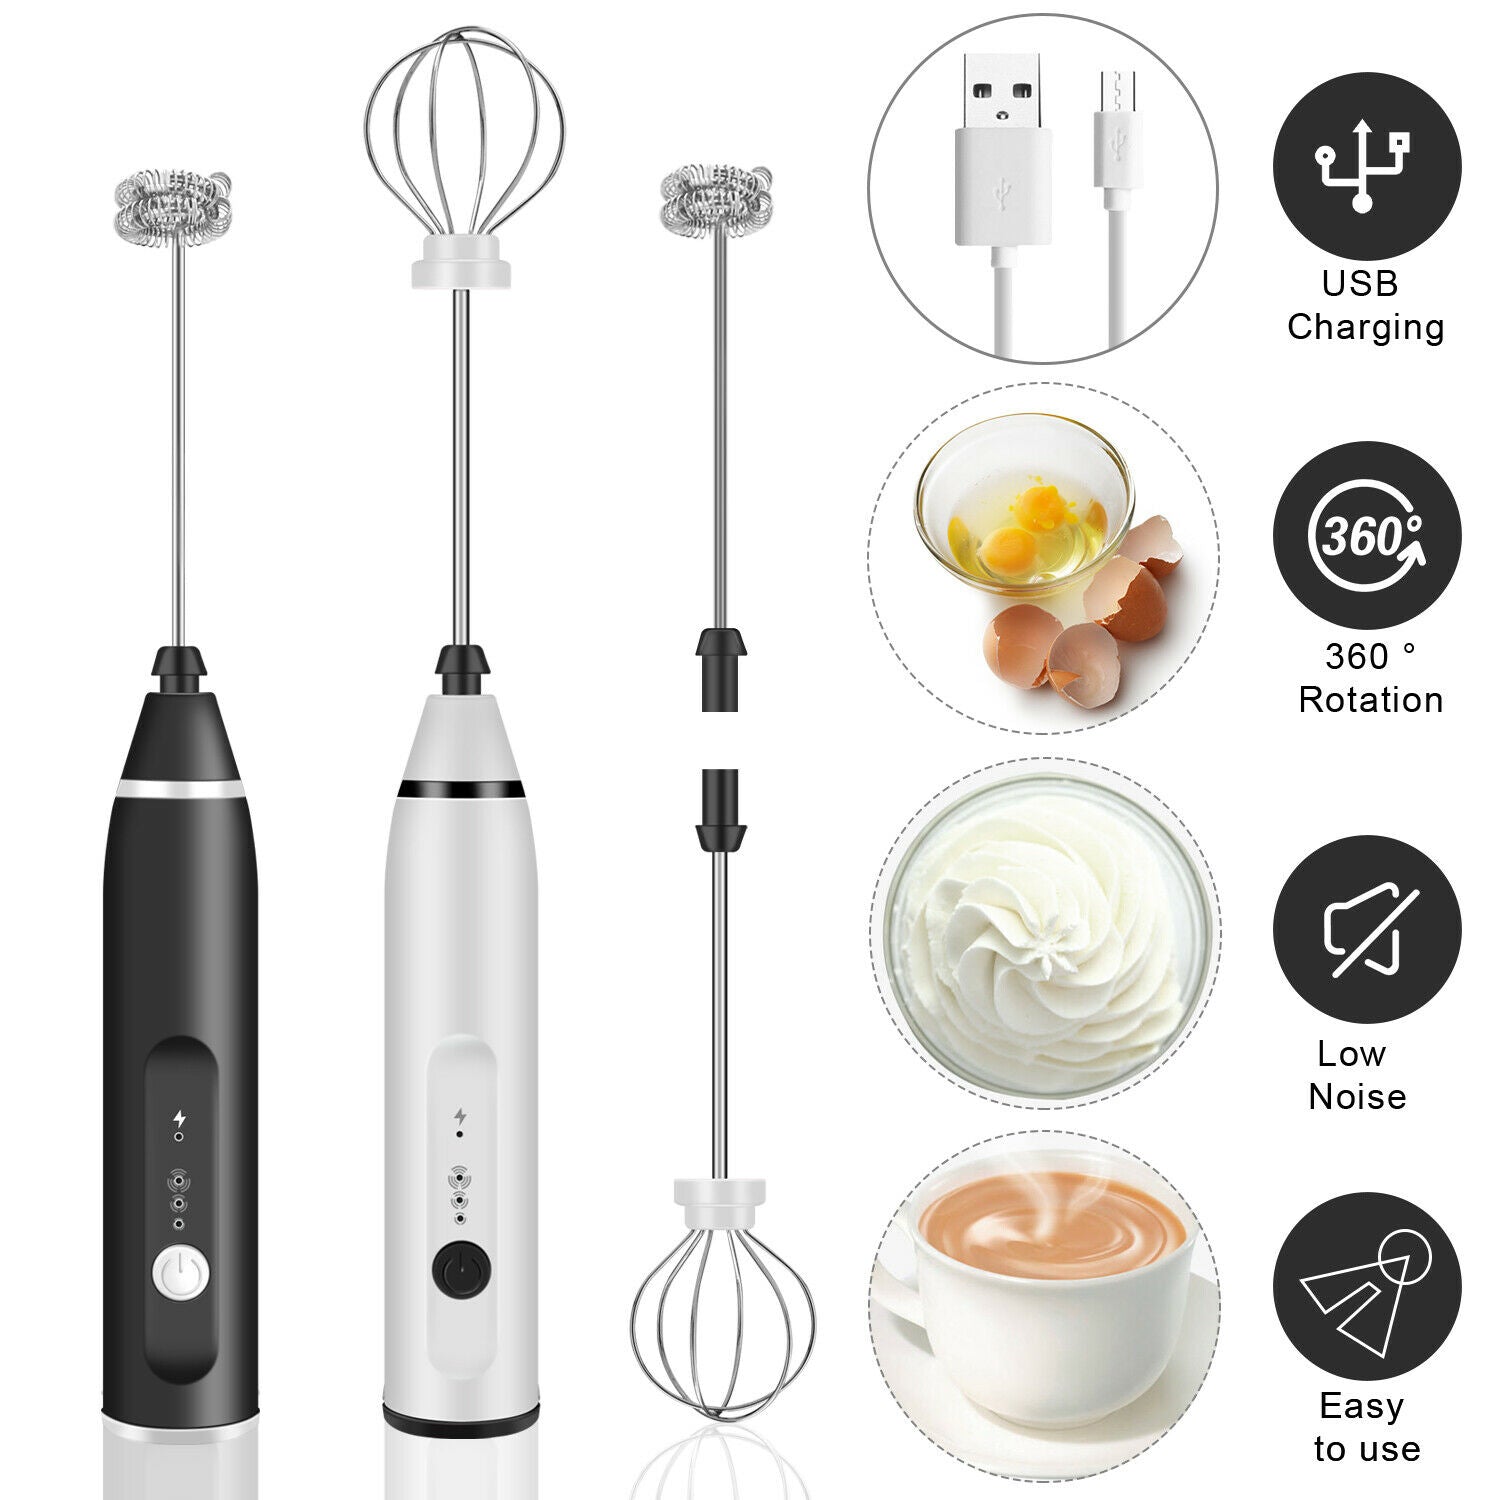 Cutie Cutlery Automatic Drink Dispenser Pump for Milk, Juice, Beverages.  Compact, Easy to Use, USB Rechargeable, Durable ABS, Silicone, Easy to  Clean.